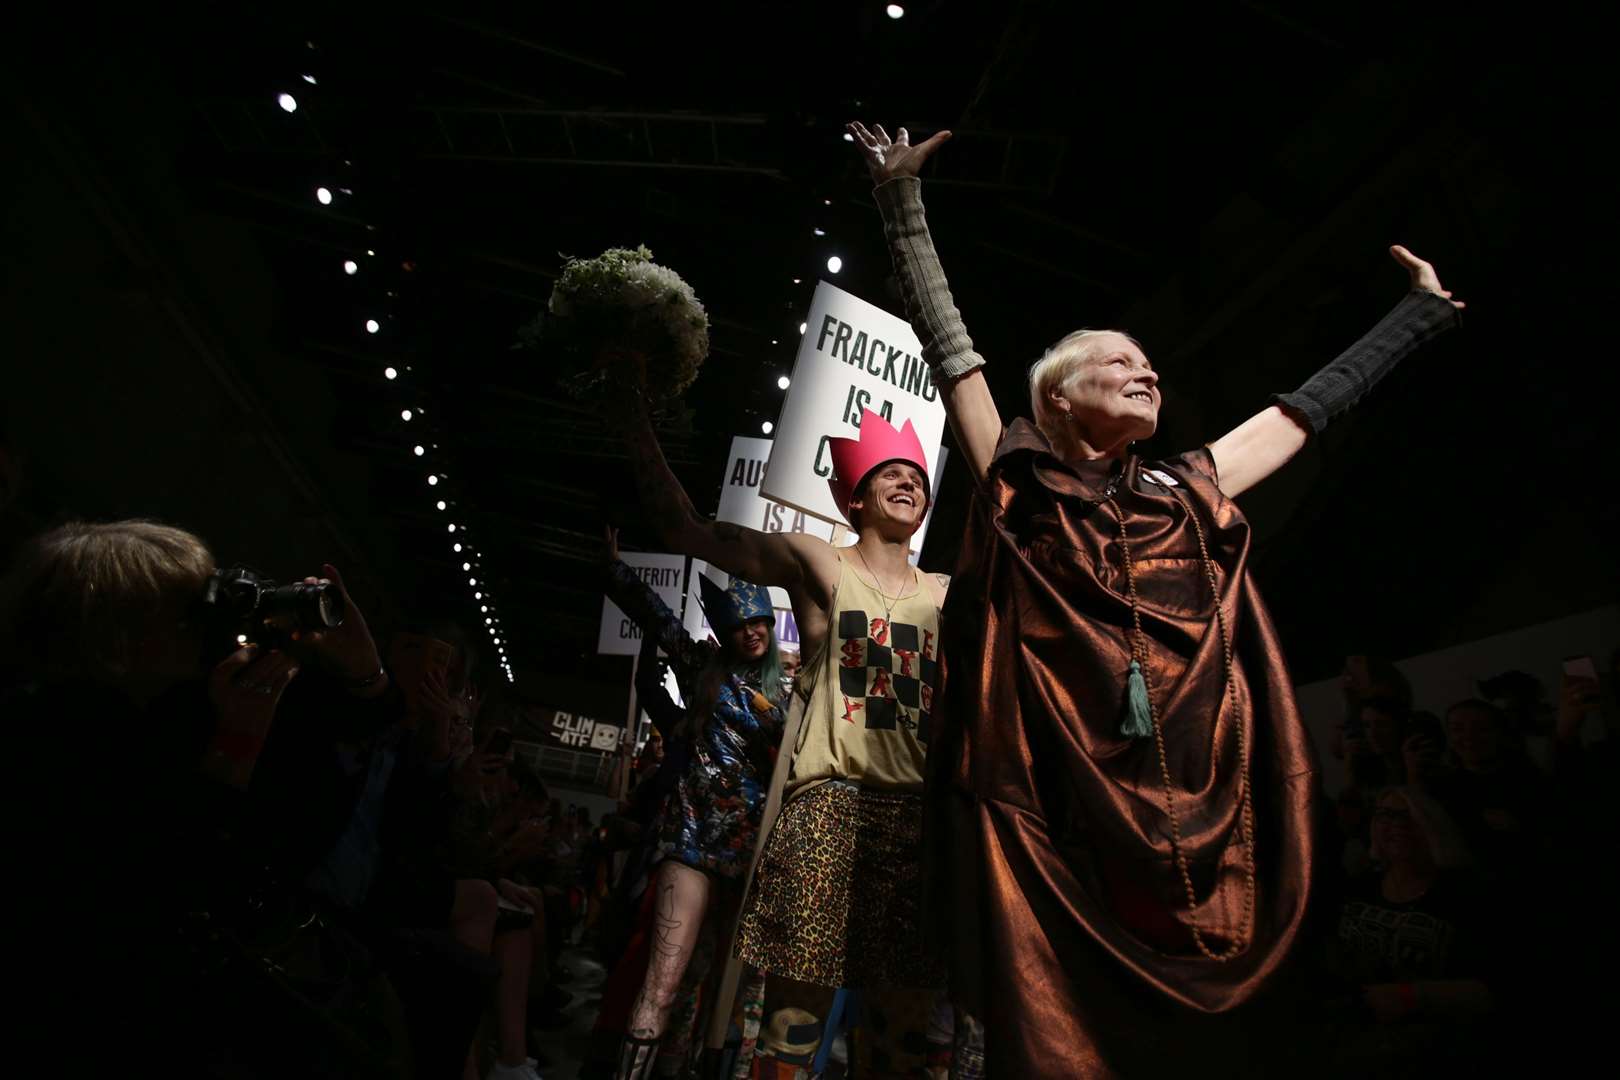 Dame Vivienne and models on the catwalk during the Vivienne Westwood Spring/Summer 2016 London Fashion Week show (Yui Mok/PA)